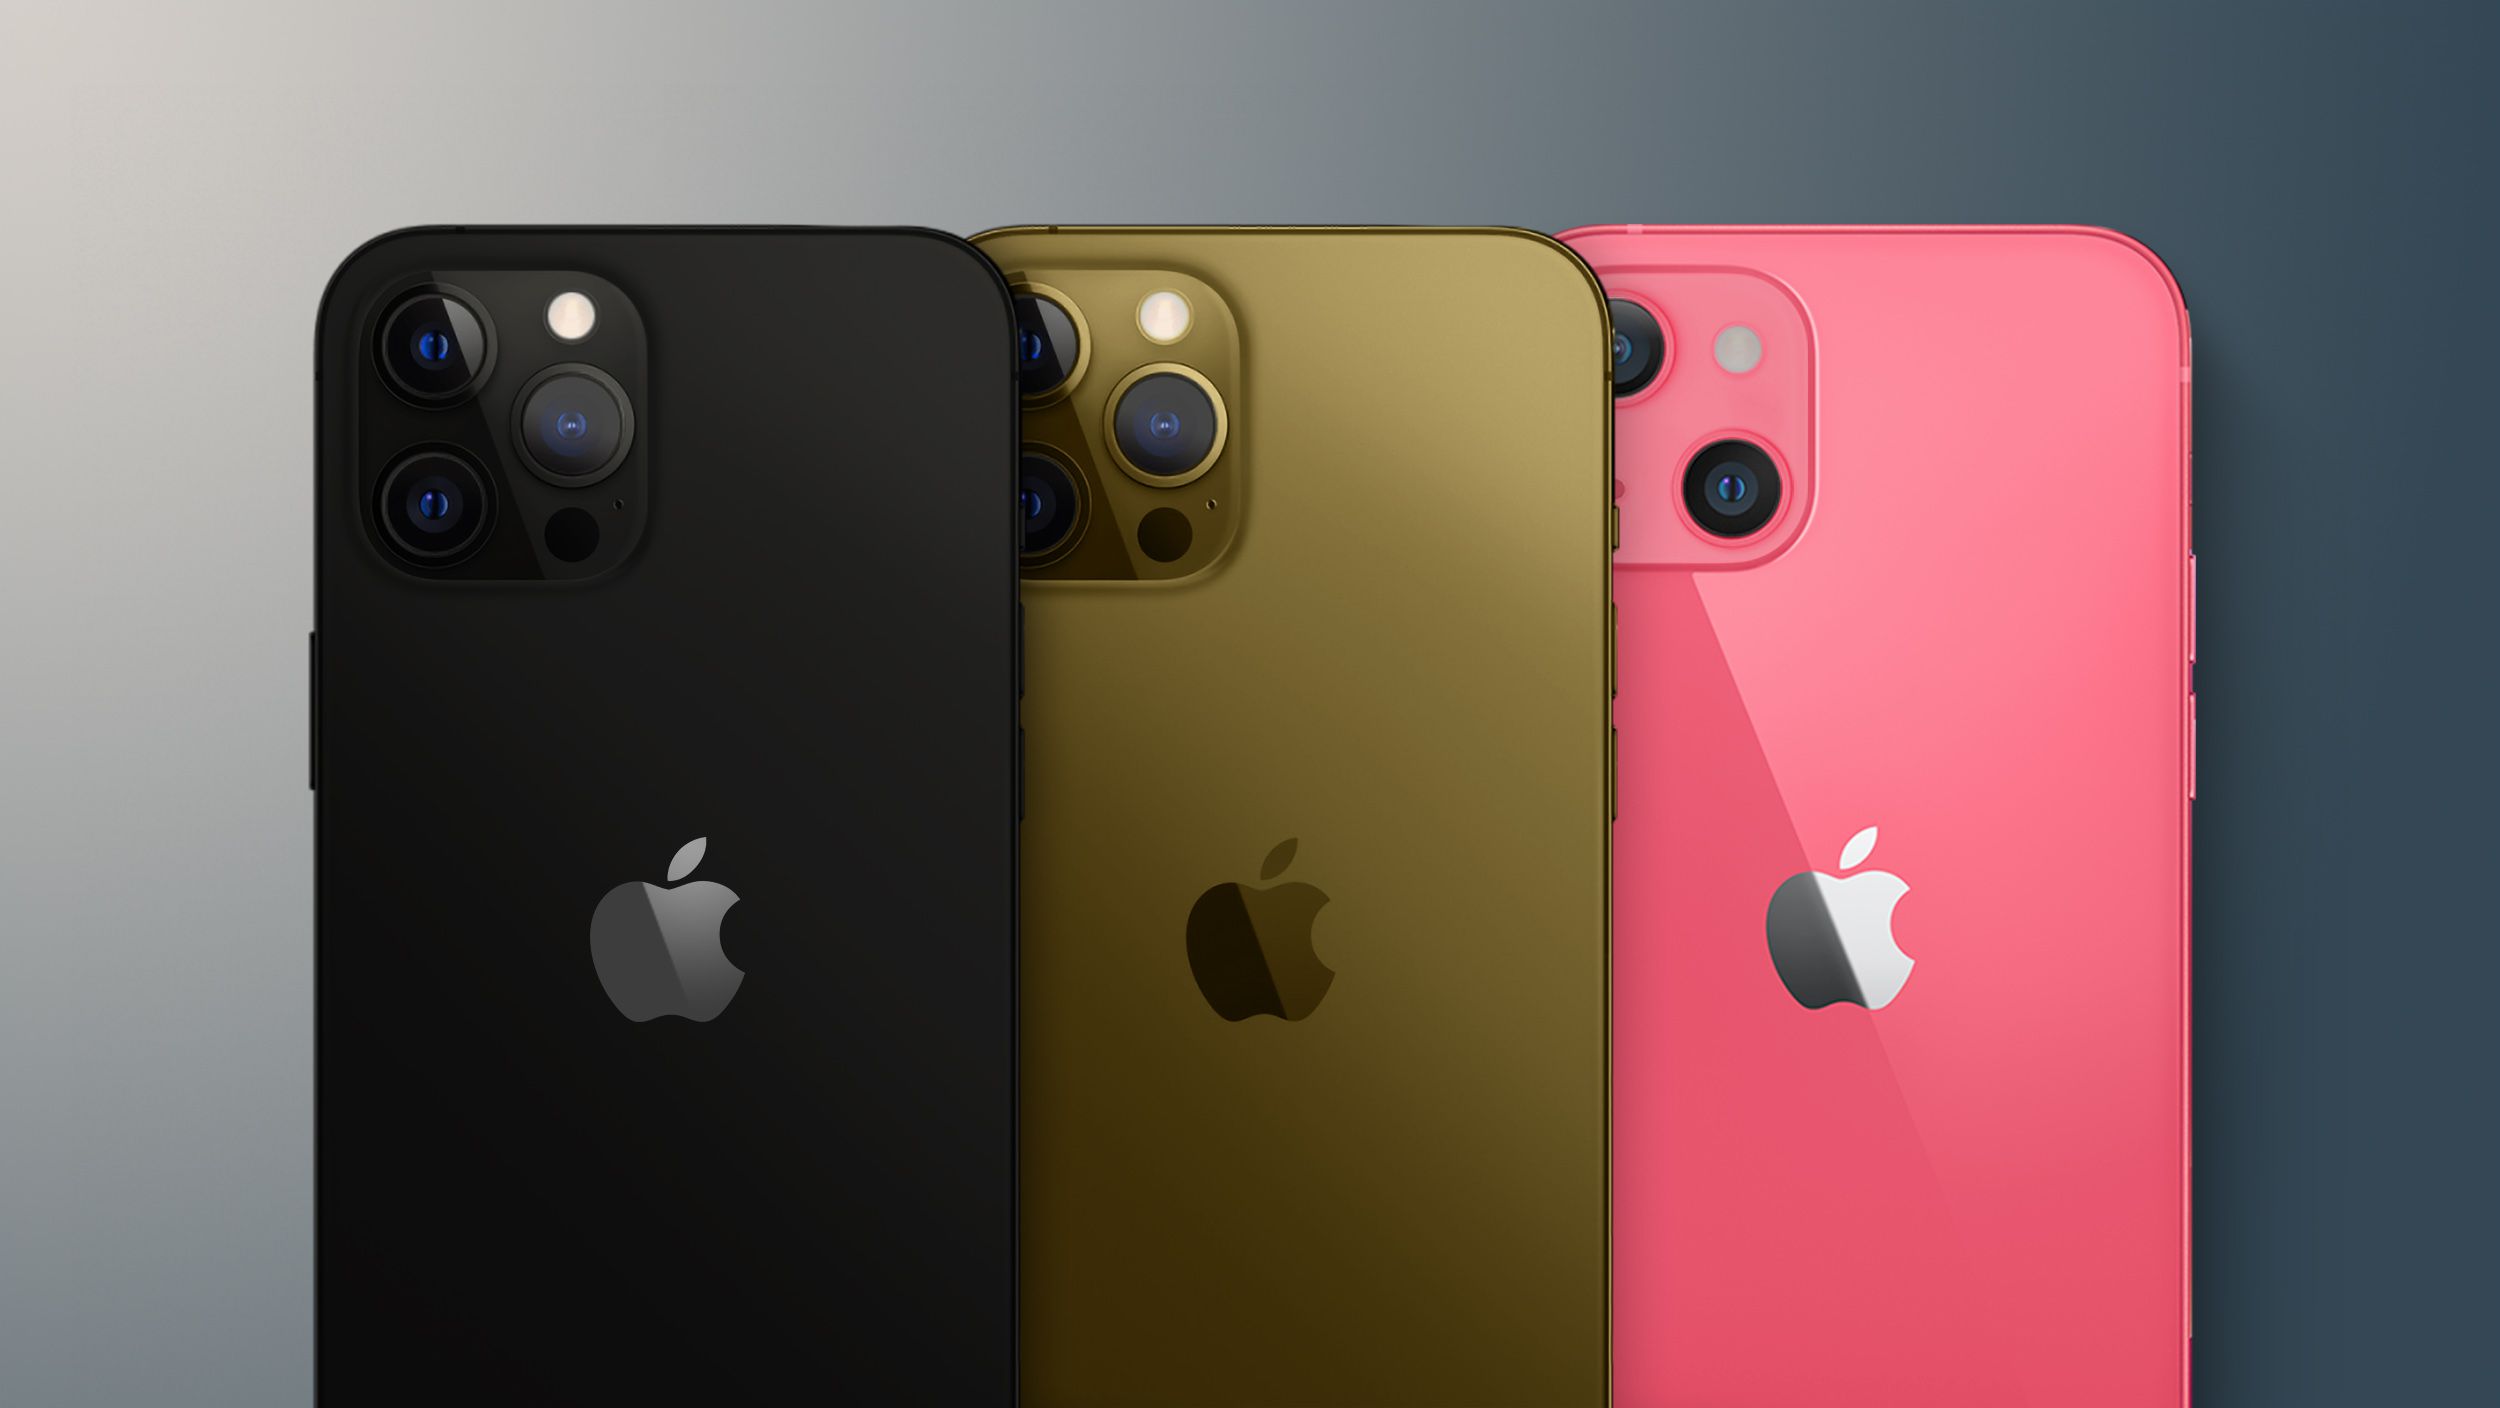 Iphone 13 Said To Offer Fewer Storage Options And New Pink Color Iphone 13 Pro Adds Black And Bronze Colors Macrumors